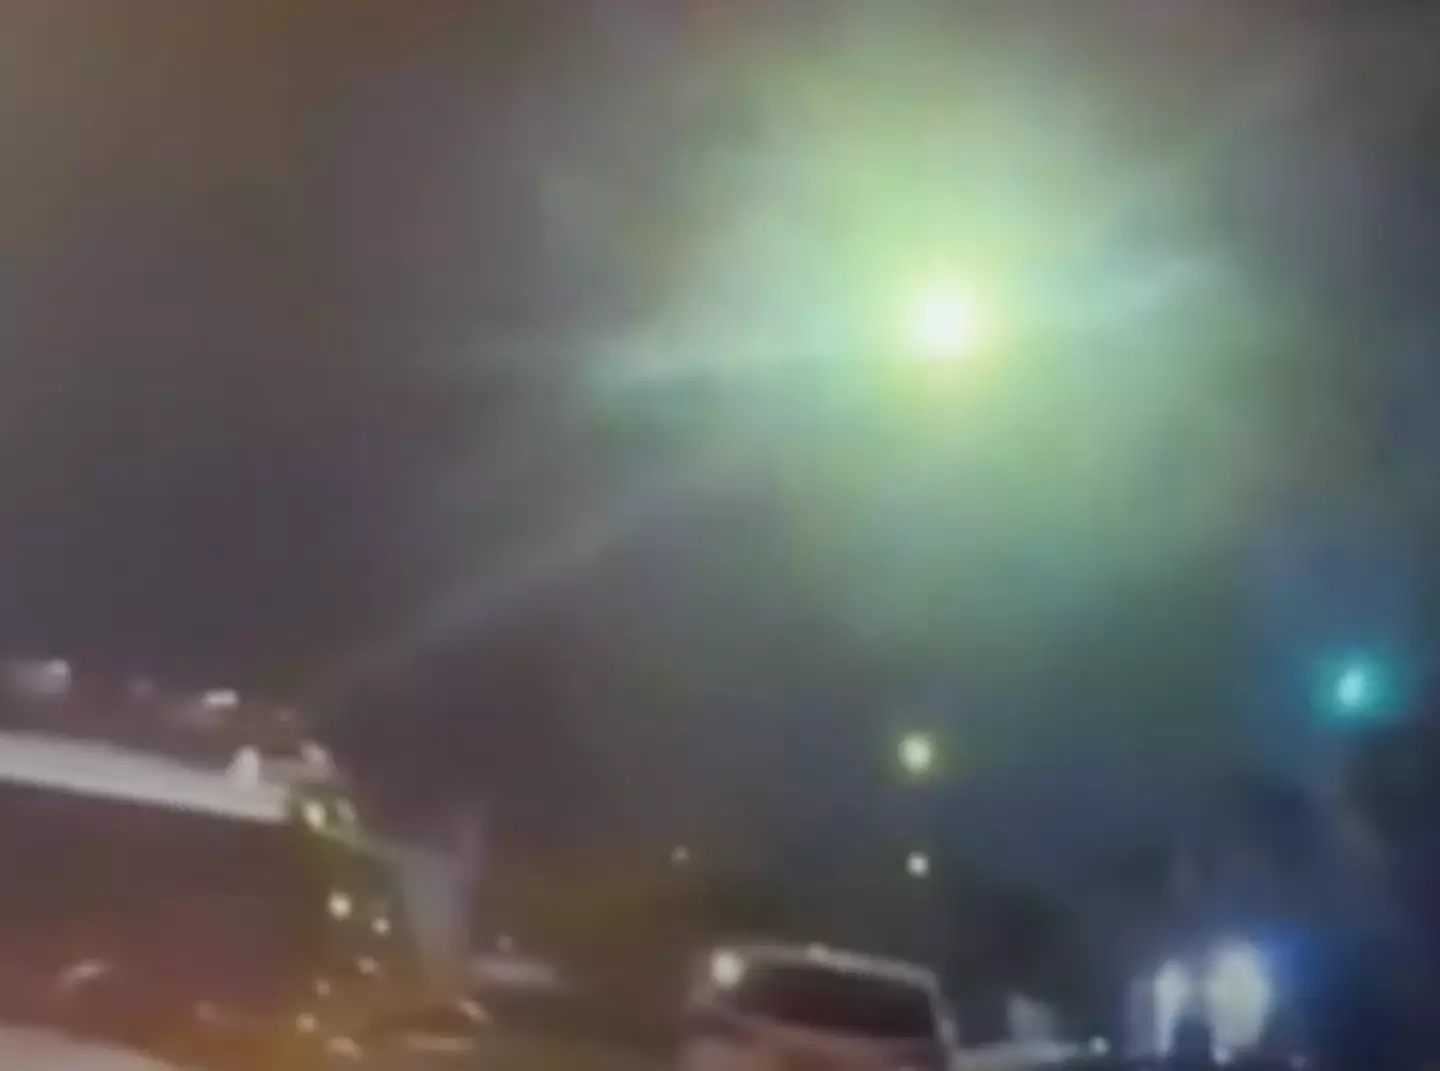 The green light could be seen moving in the footage. (Las Vegas Metropolitan Police)